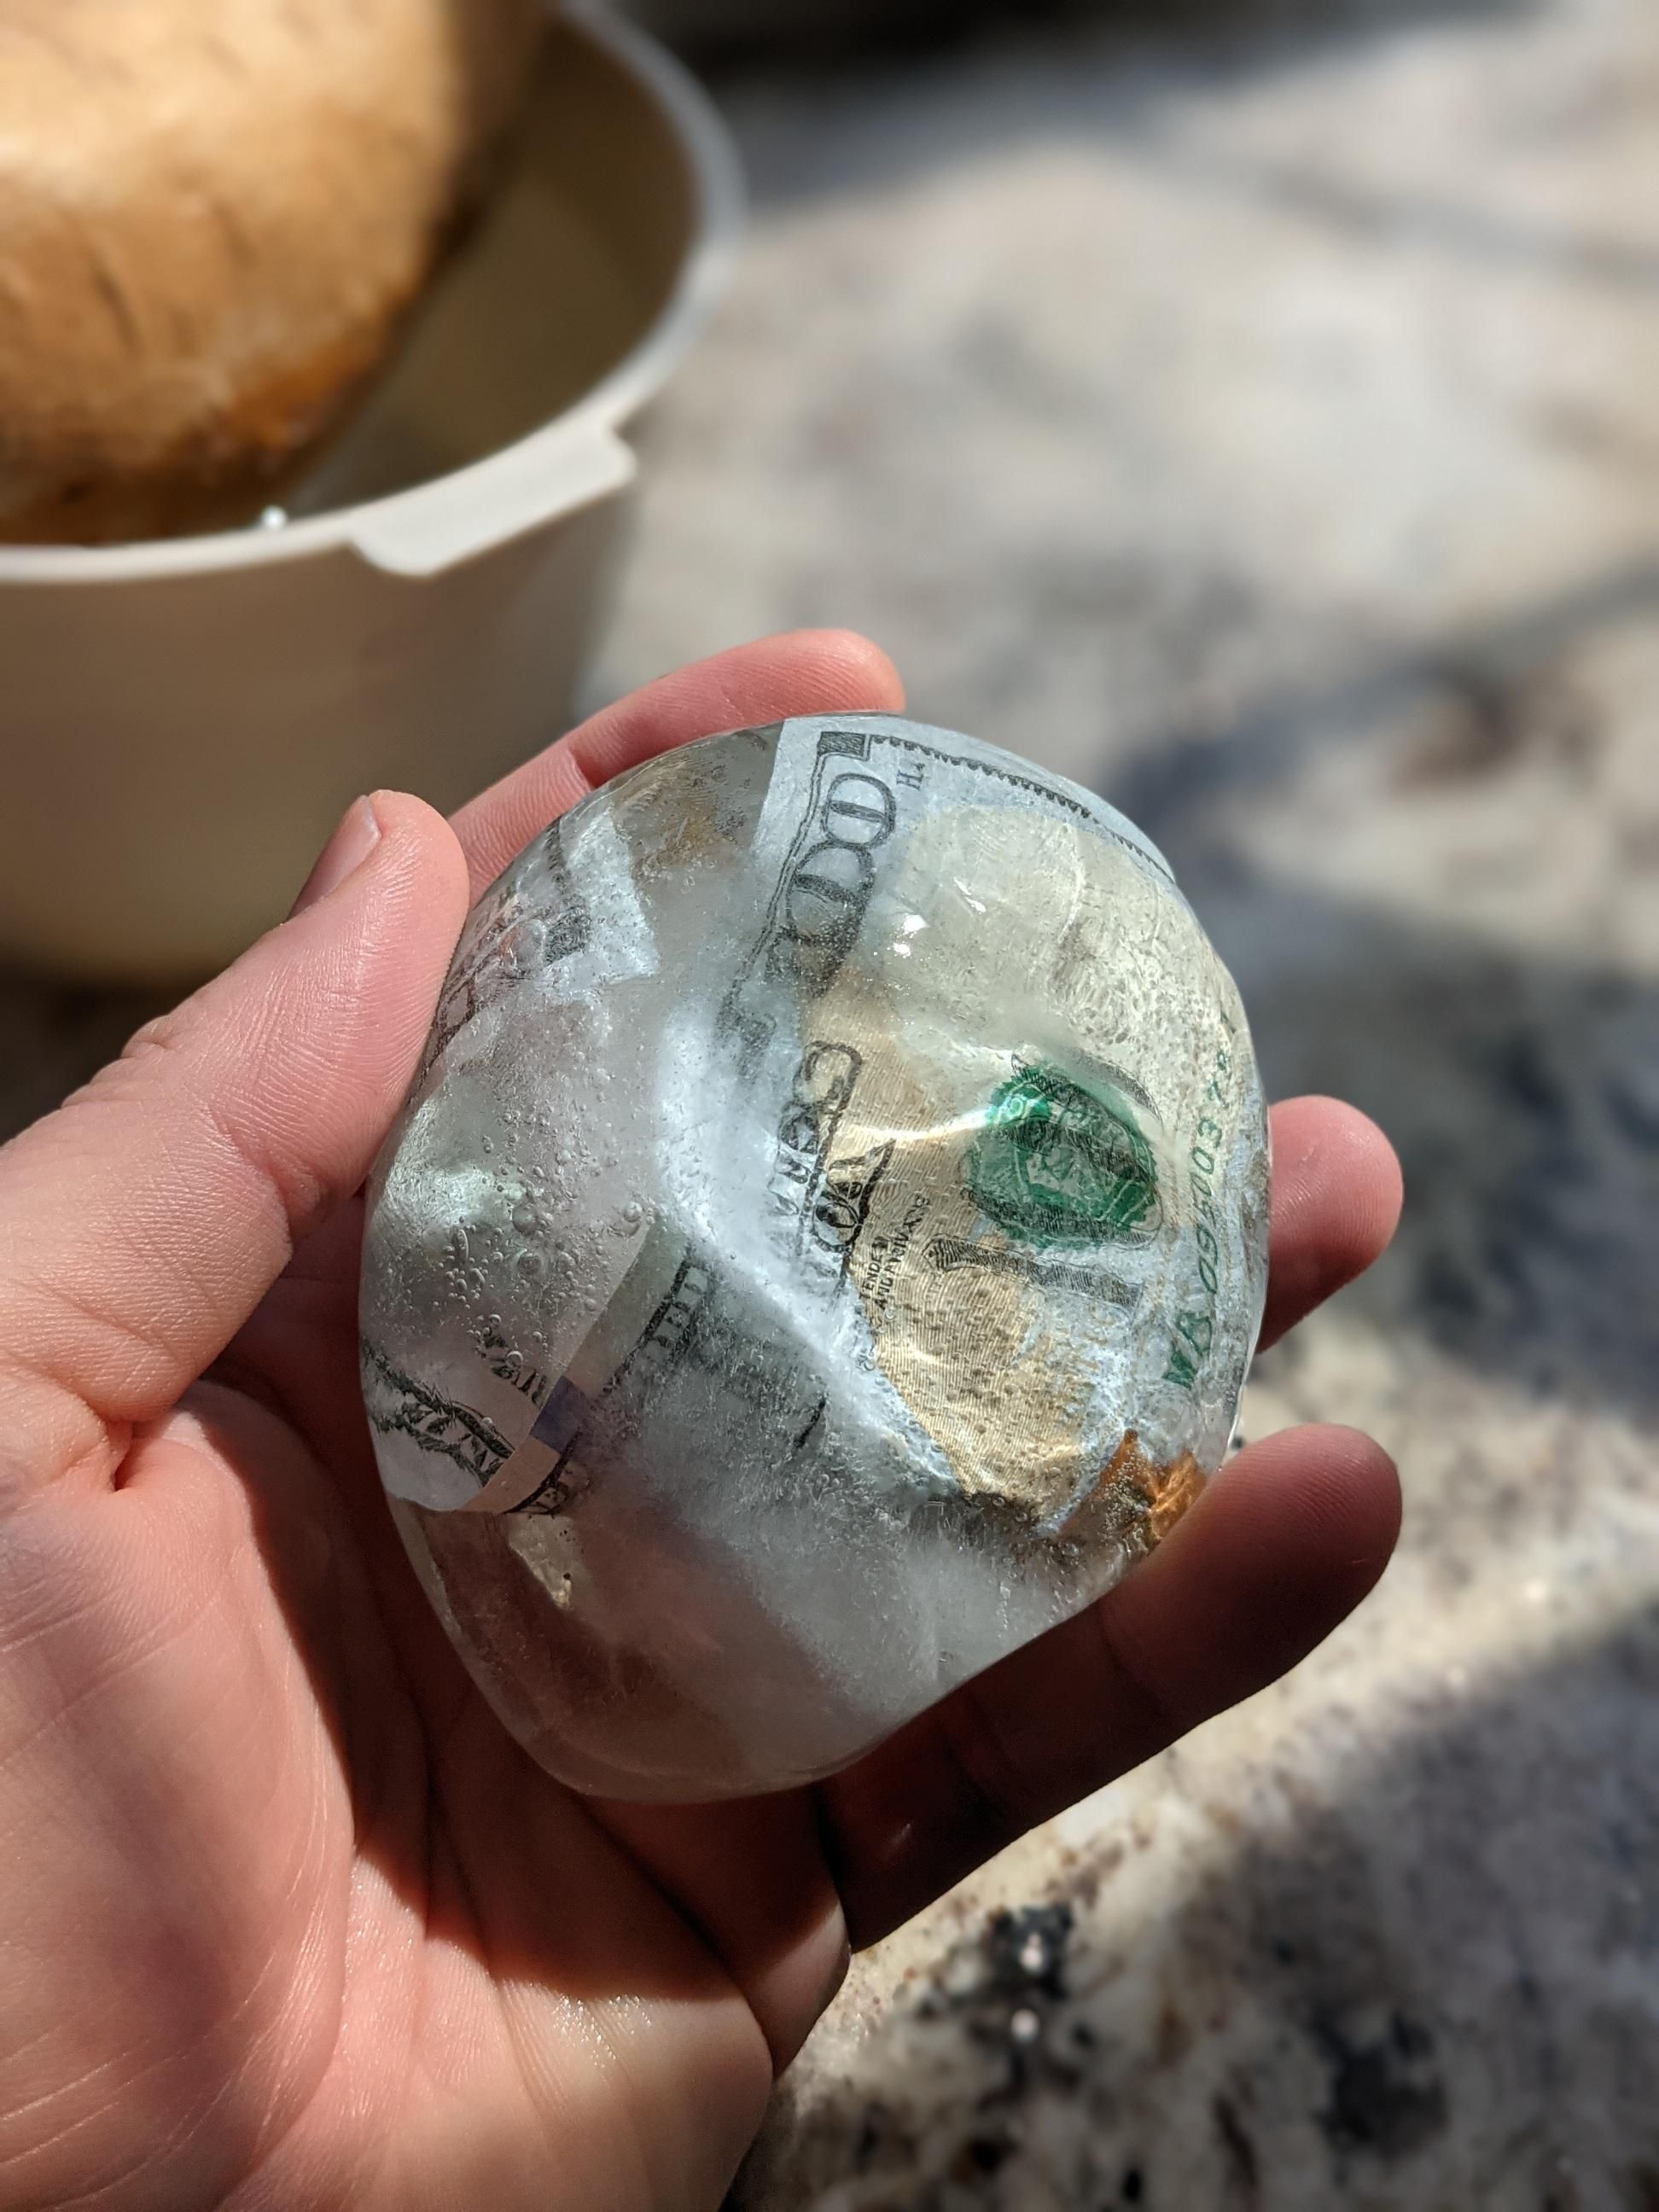 My son said he just wanted some cold hard cash for his birthday..